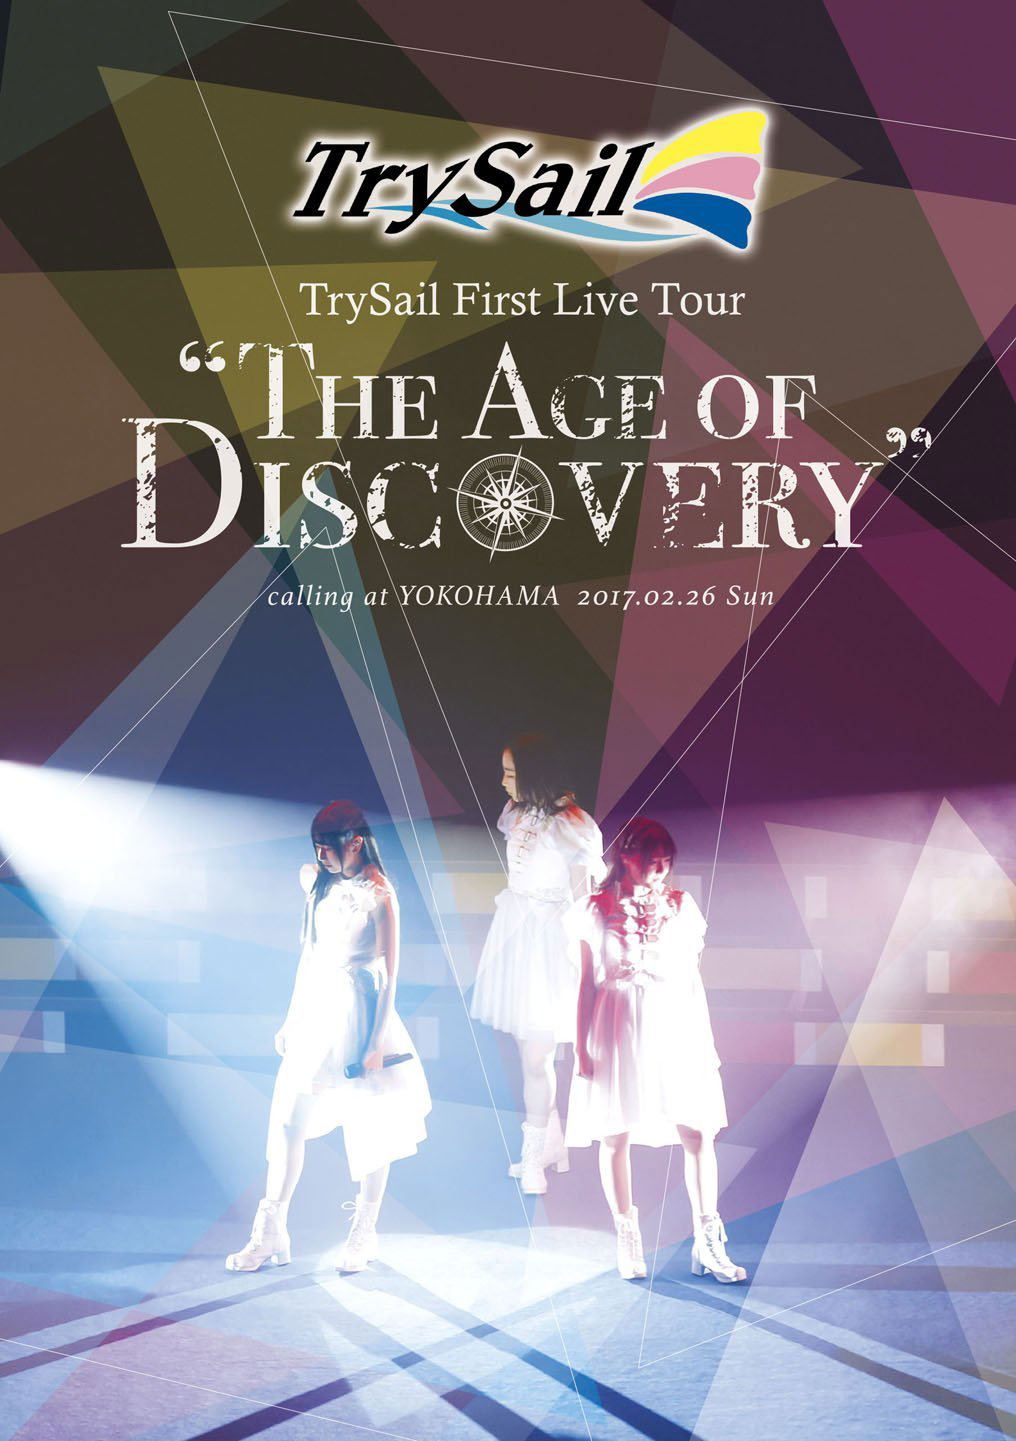 Trysail First Live Tour - The Age Of Discovery